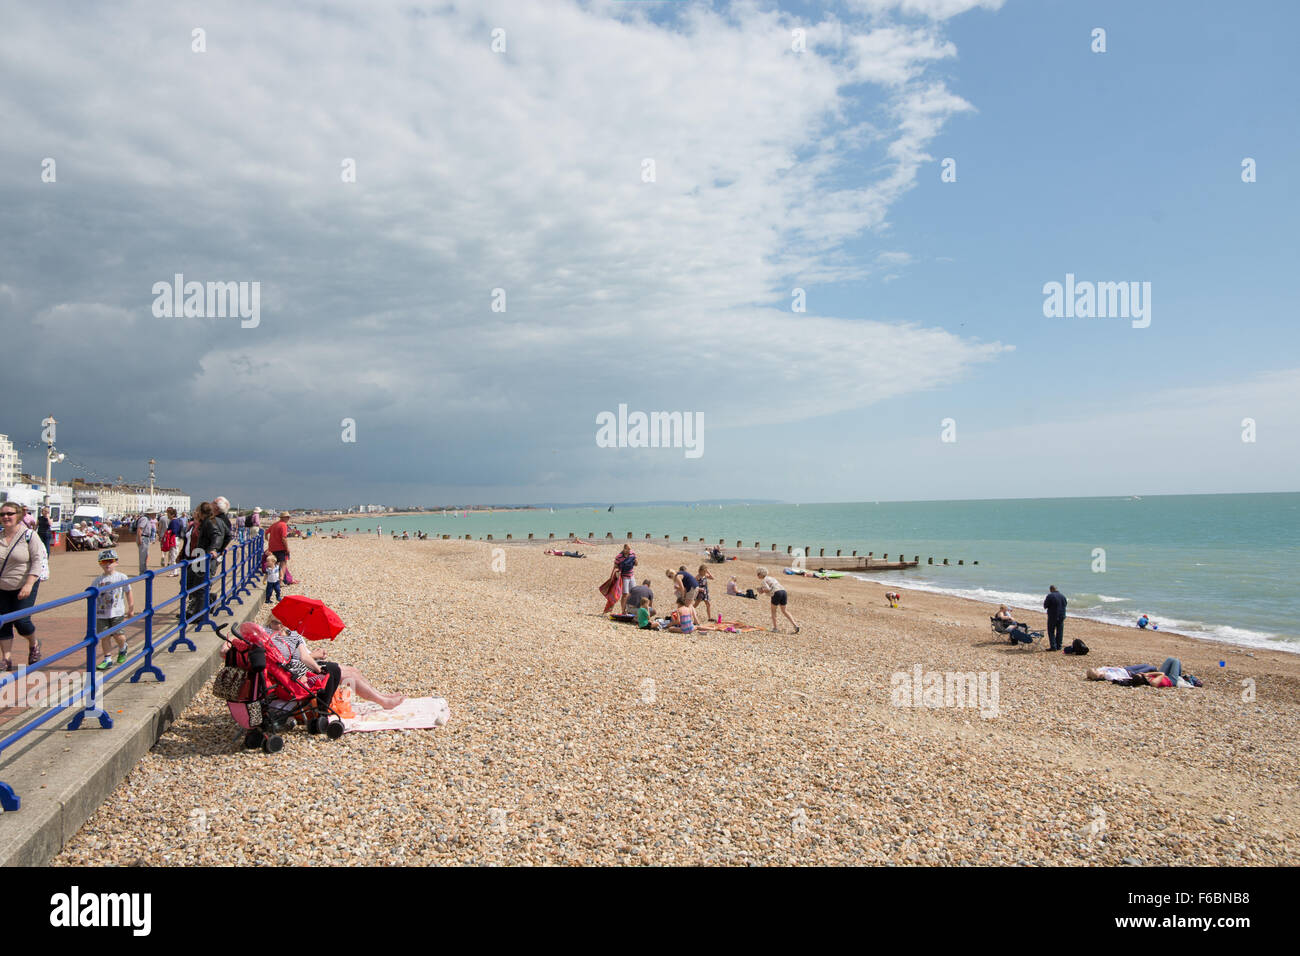 Families enjoy a break on the stoney beach at Easbourne. Will the looming cloud on the horizon spoil there day? Stock Photo